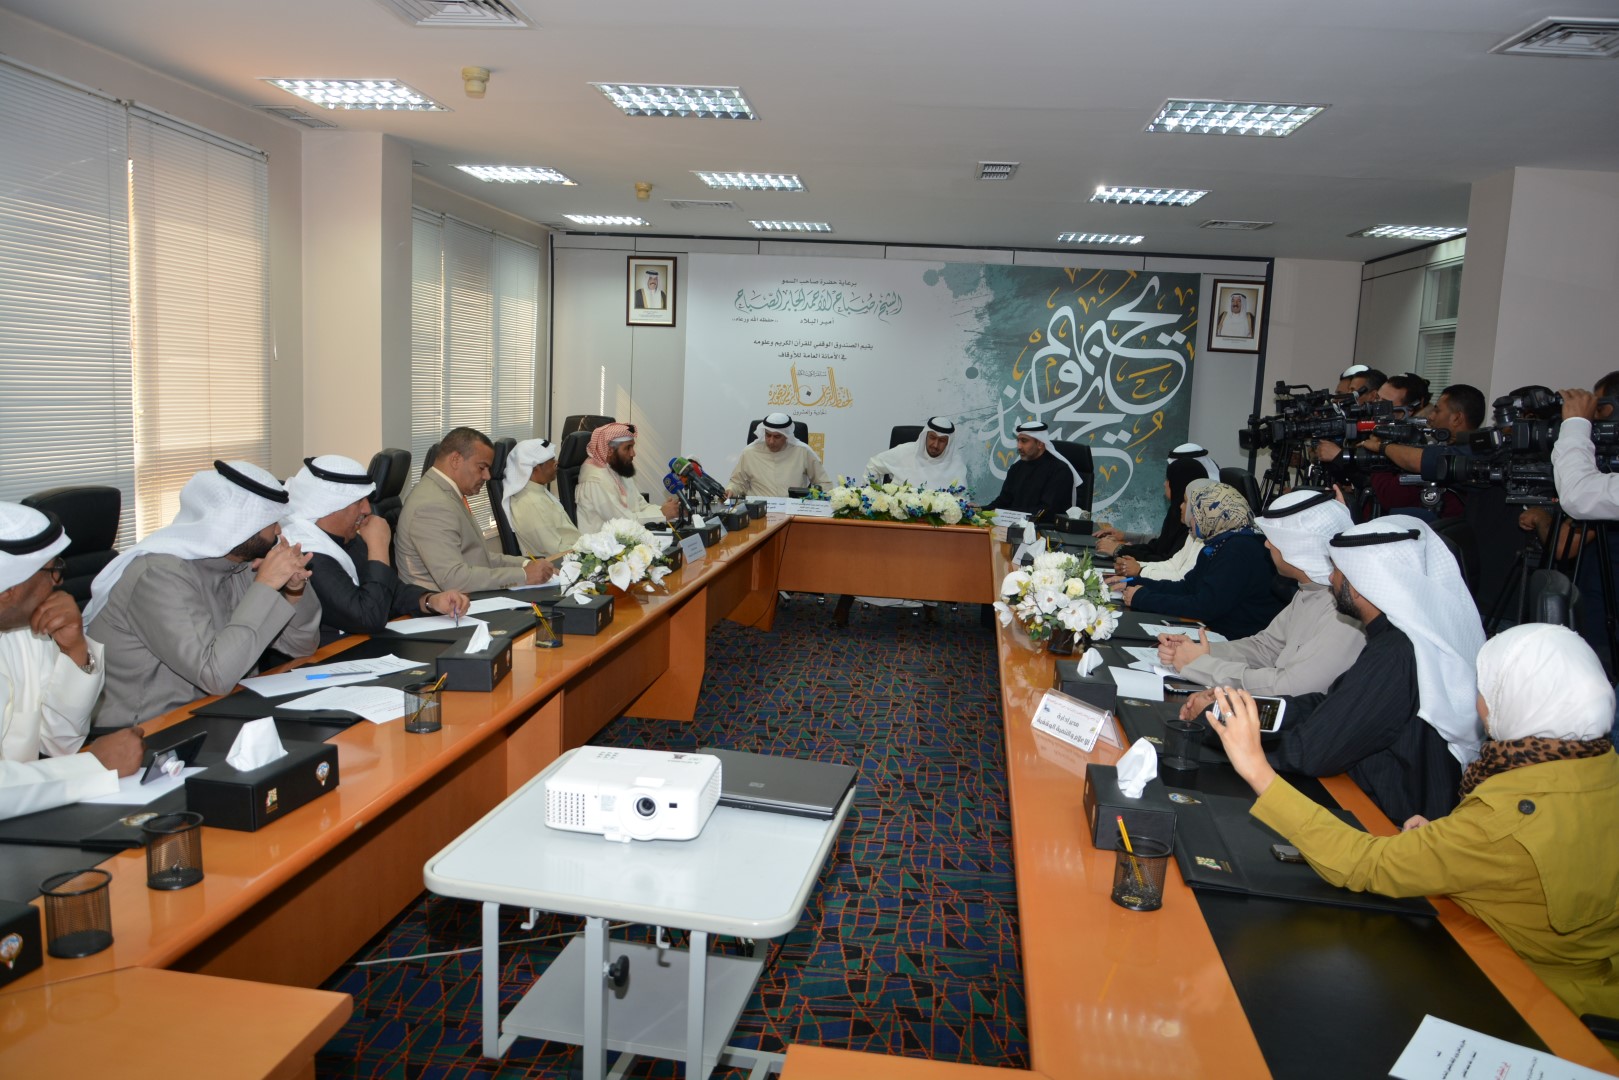 Minister of Justice and Minister of Awqaf and Islamic Affairs Dr. Fahad Al-Afasi during the press conference